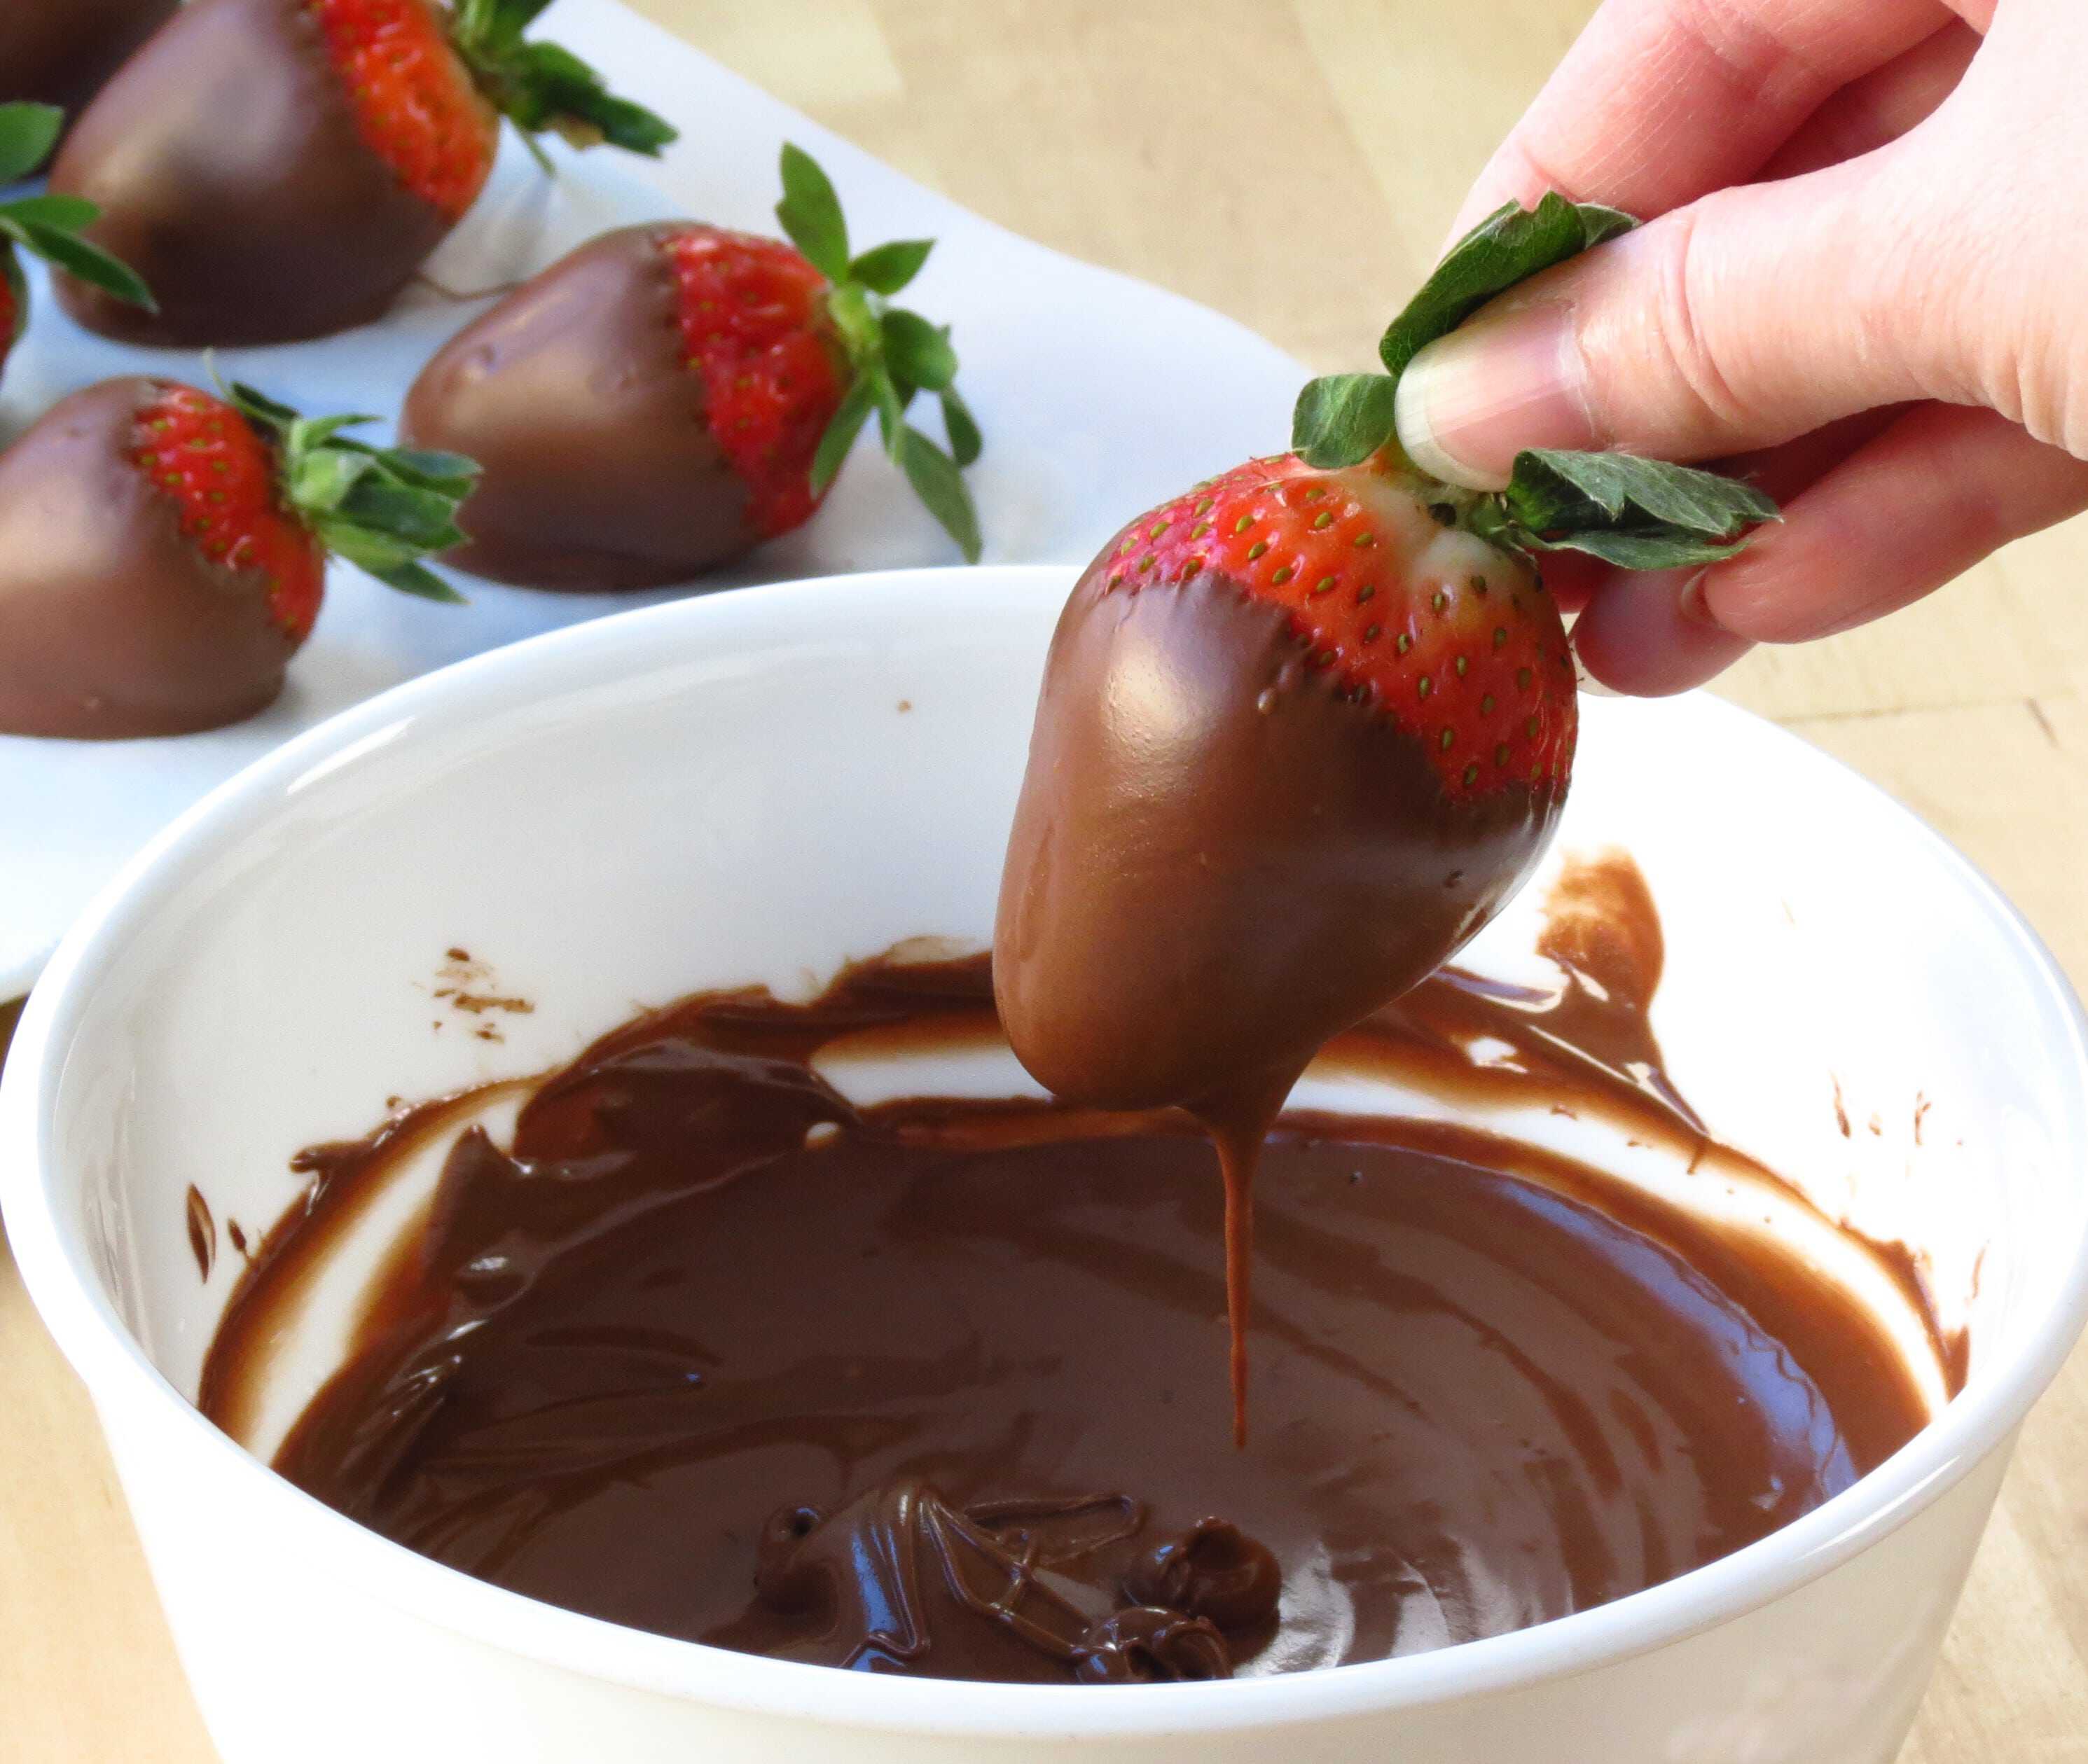 Dipping strawberry into melted chocolate